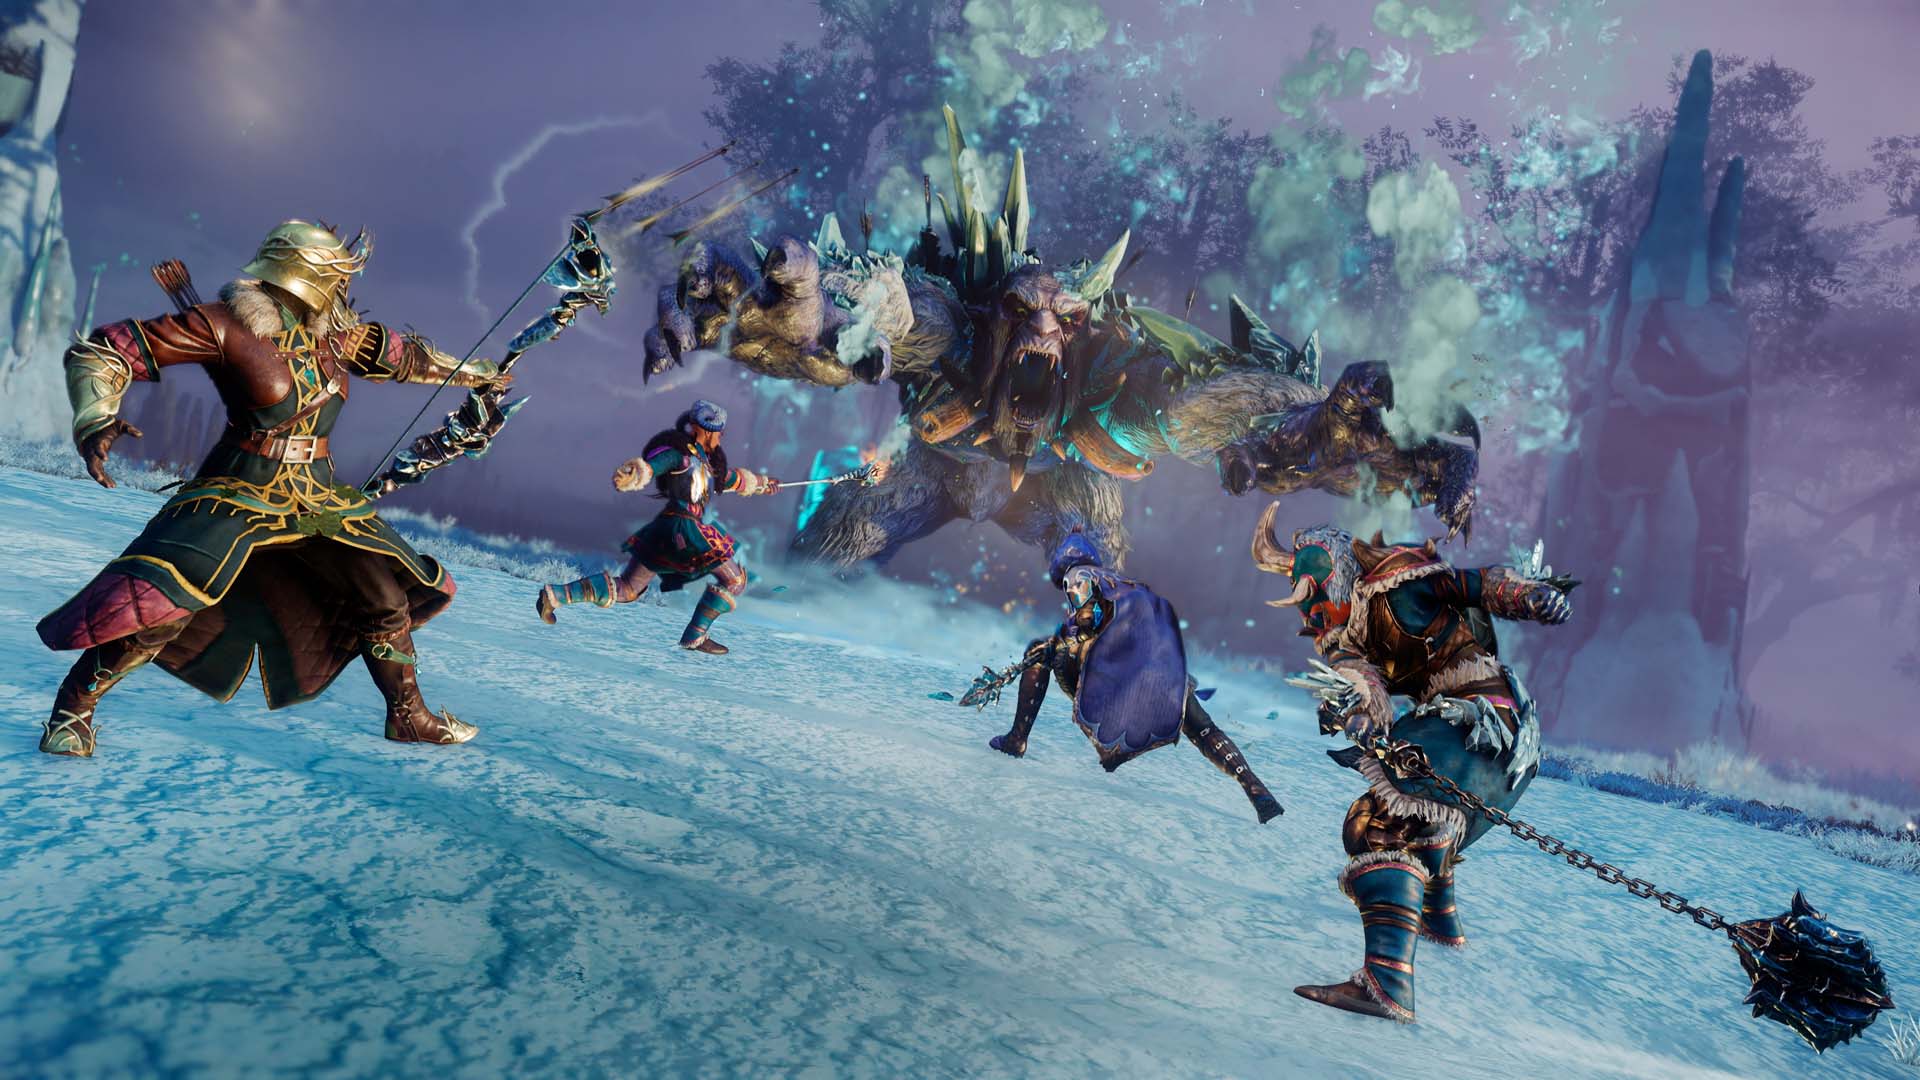 Fight The Winter Warrior In New World's Winter Convergence Event